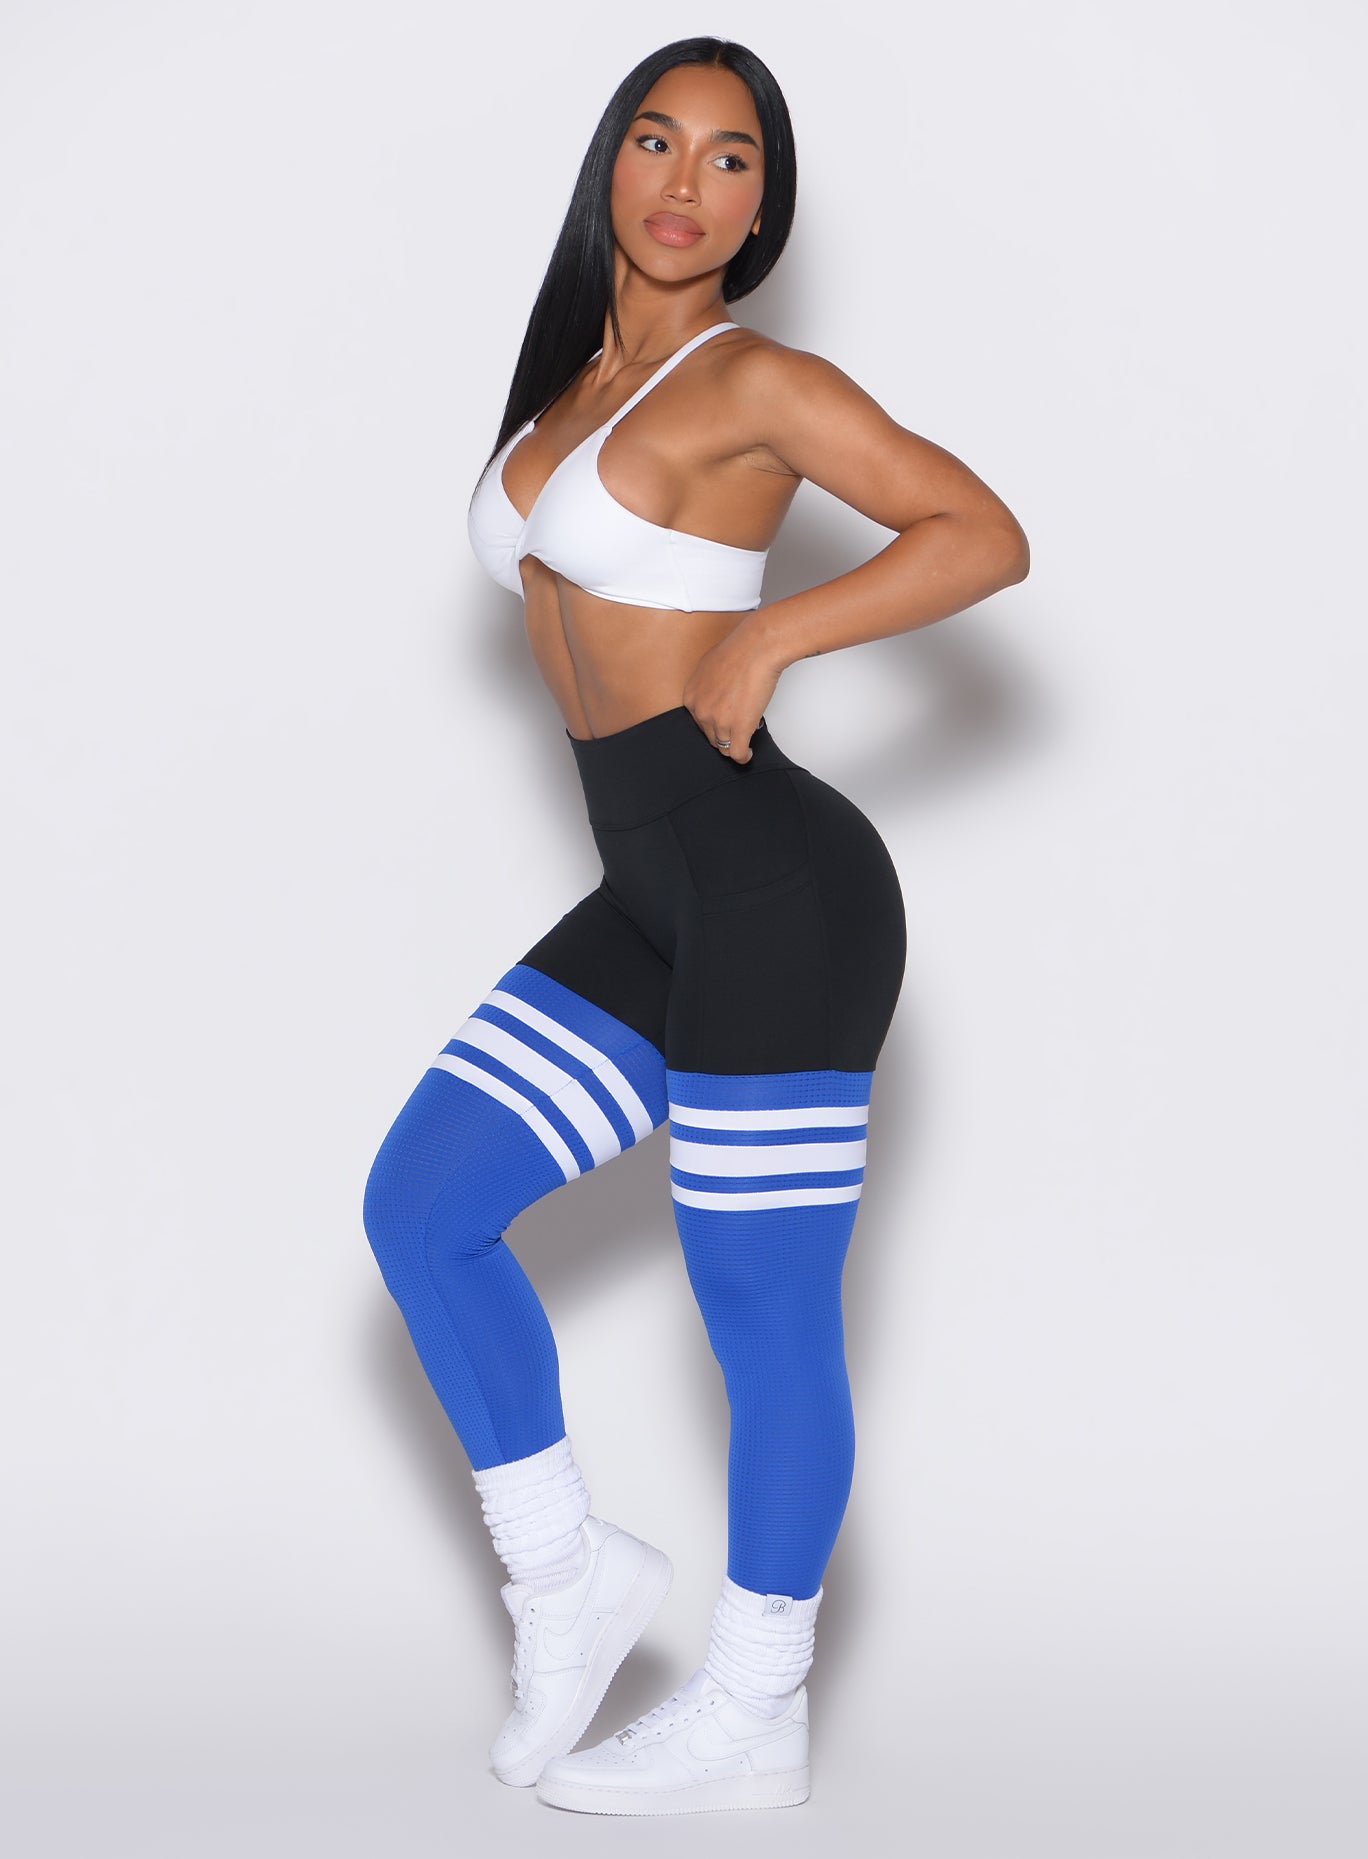 Left side profile view of a model wearing the Perform Thigh Highs in Black Sky color along with a white sports bra